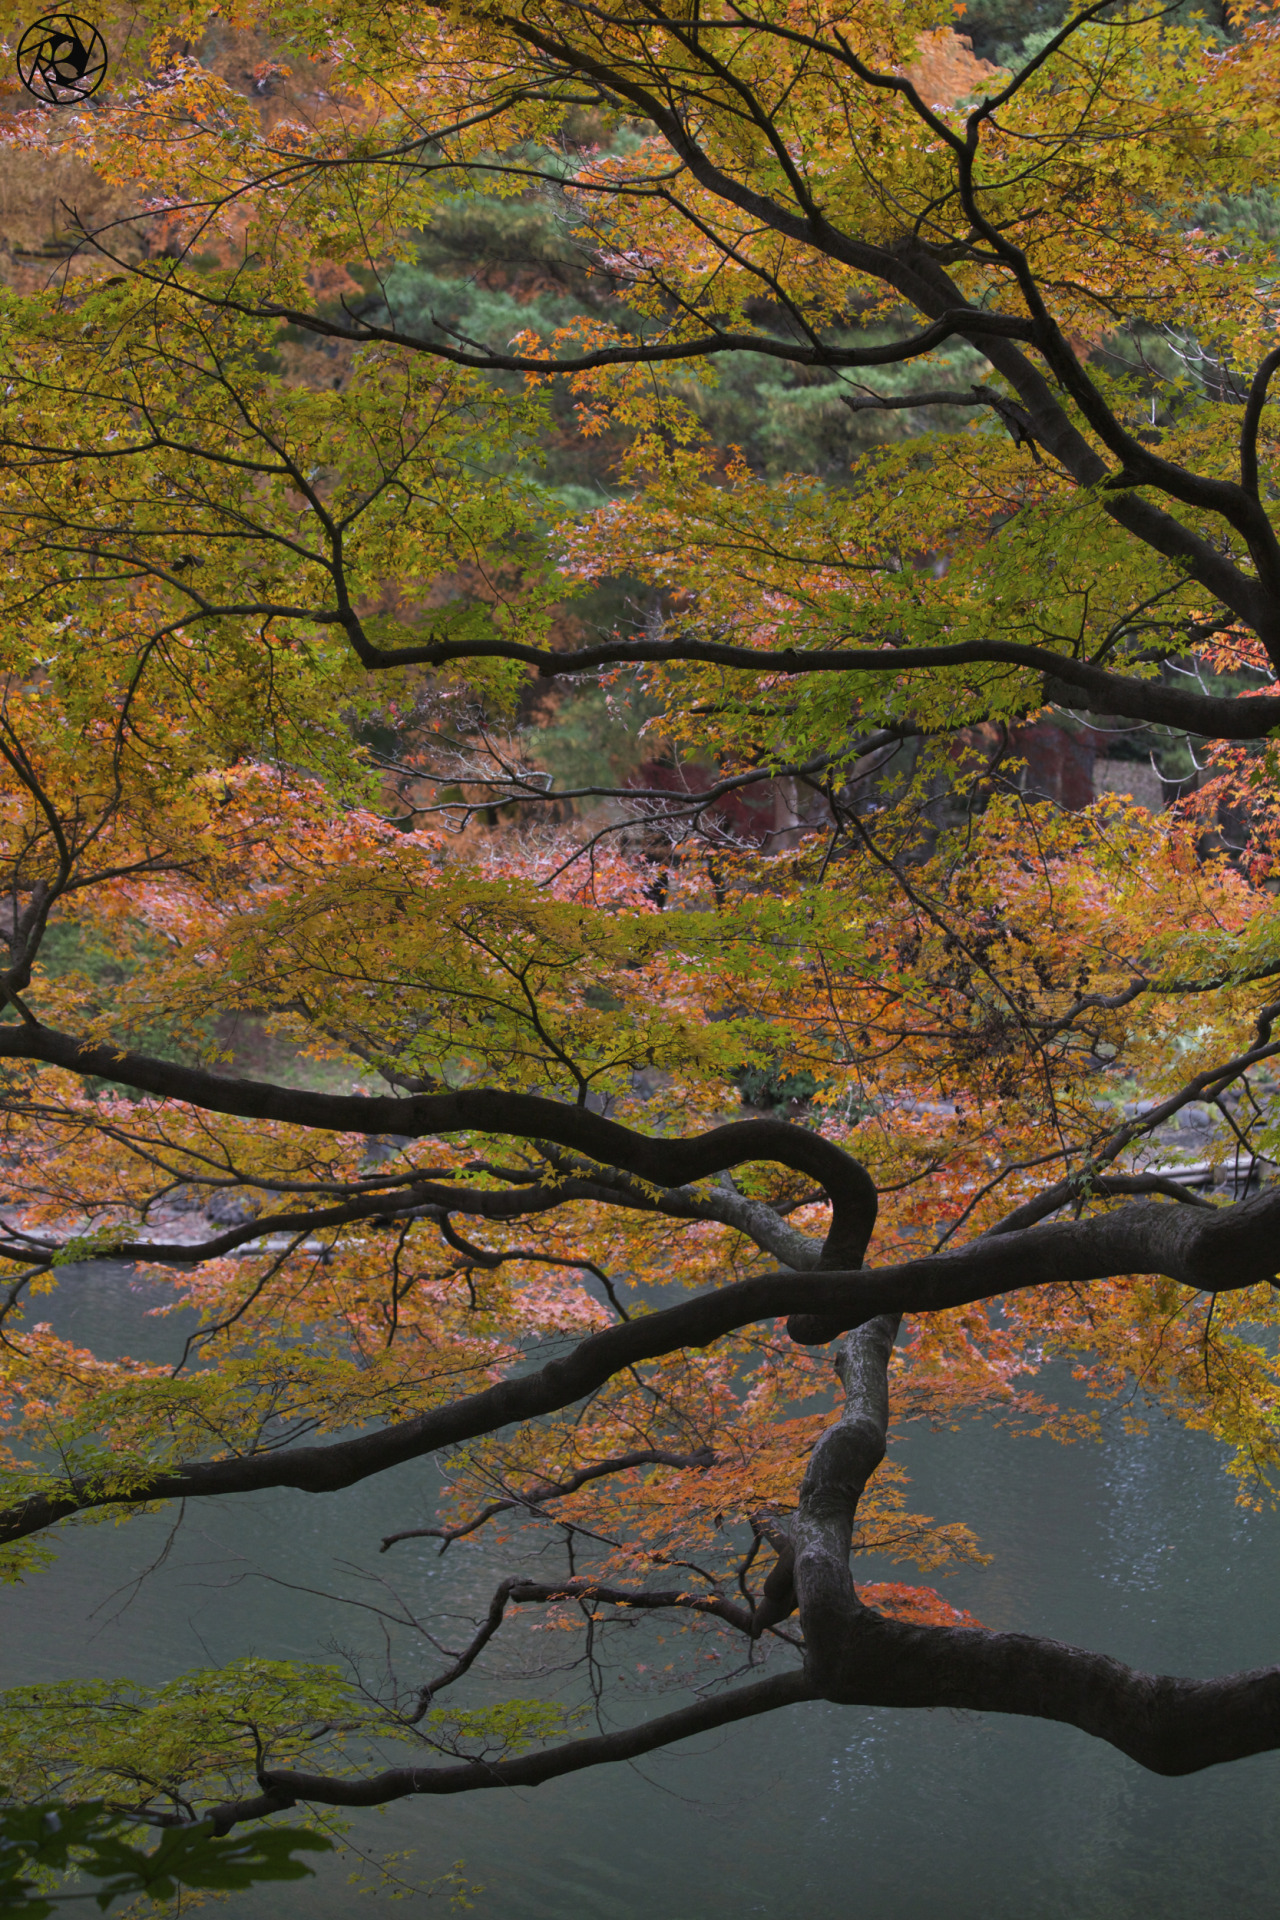 <p><b>Sometimes the subject is inside the frame and sometimes the subject is the frame.</b></p><p>This image “Fall in Japan” was captured at Shinjuku Gyoen. Interested in <a href="http://www.PhotoTour.Tokyo">photo-walks and lessons</a>?</p>